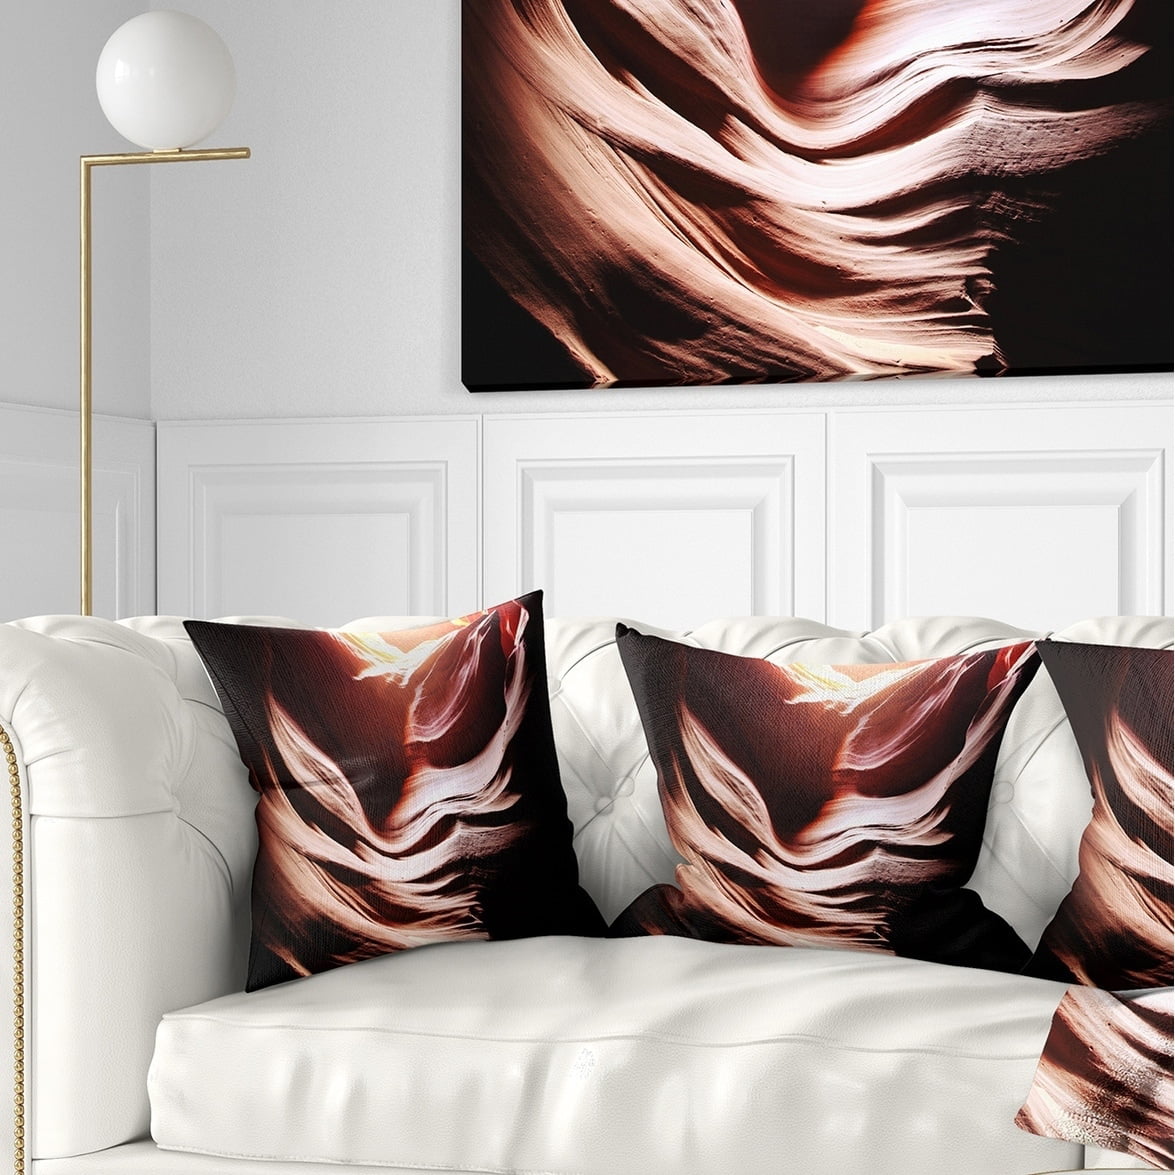 x 16 in Insert Printed On Both Side Designart CU8810-16-16 Antelope Canyon in Brown Shade Landscape Photography Cushion Cover for Living Room Sofa Throw Pillow